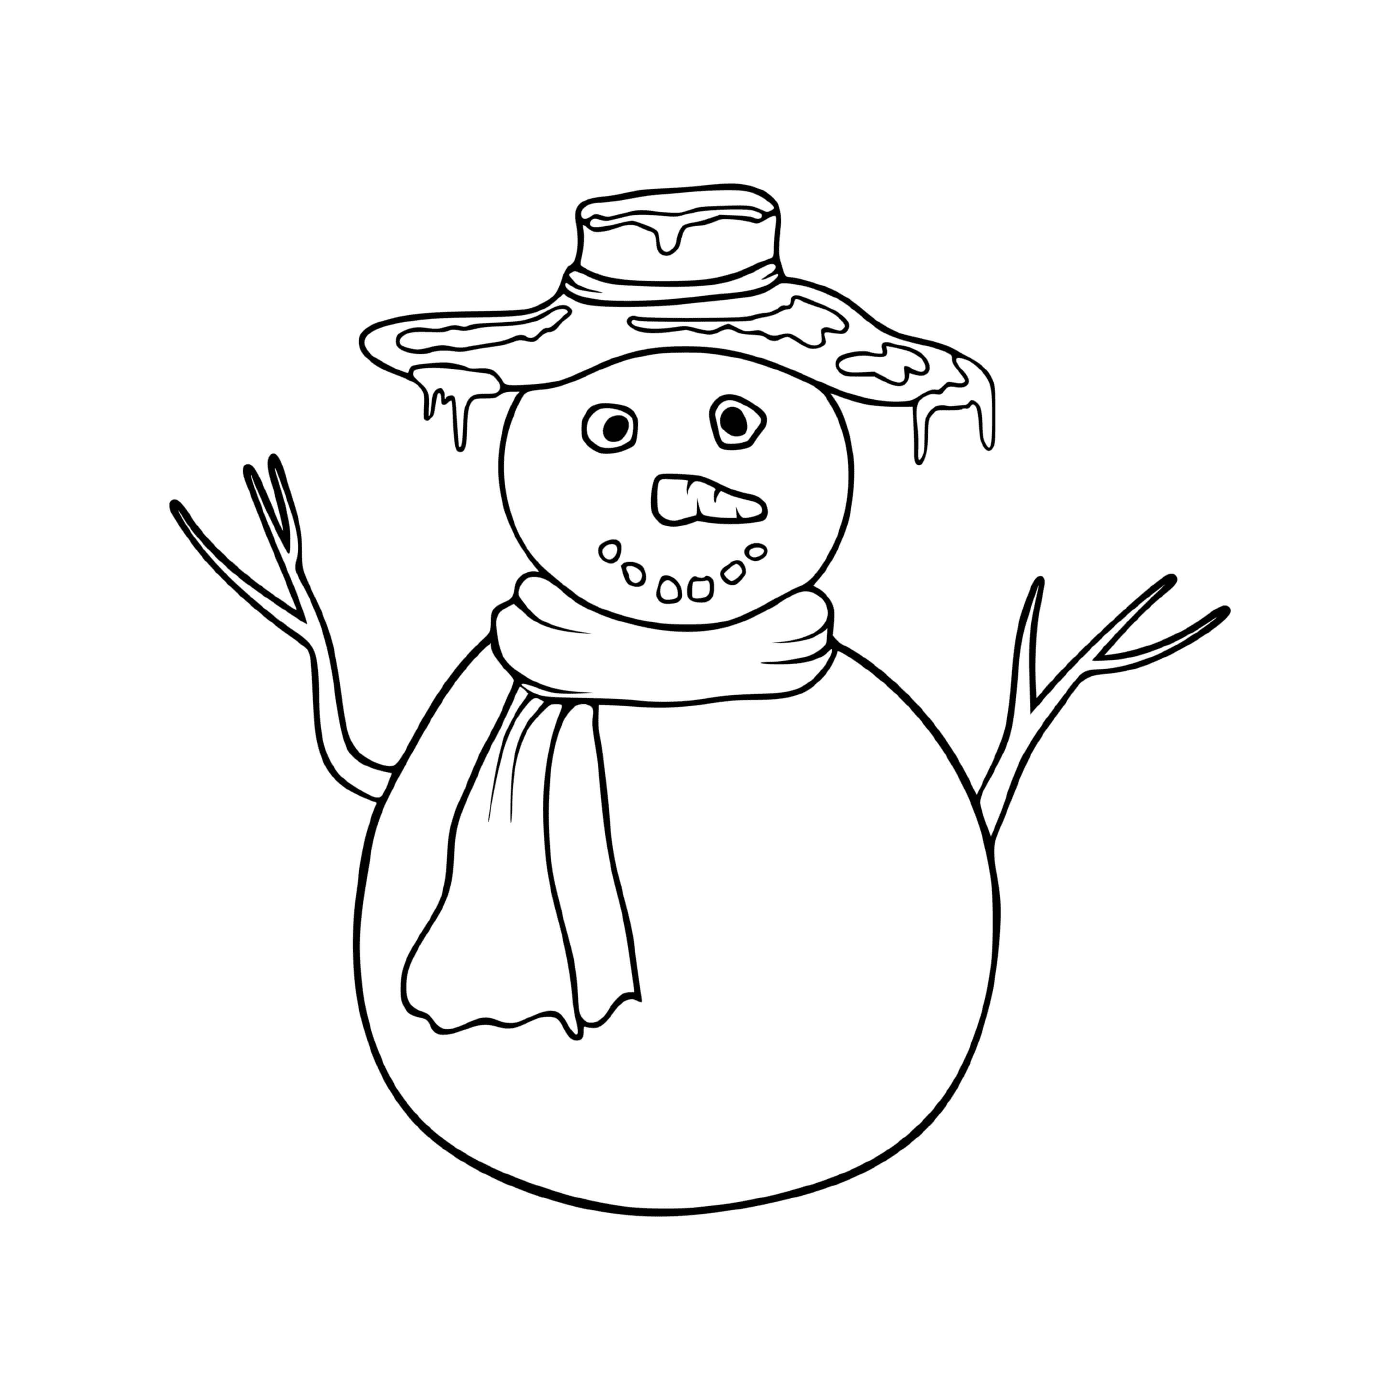  Frozen by the cold of December, the snowman 